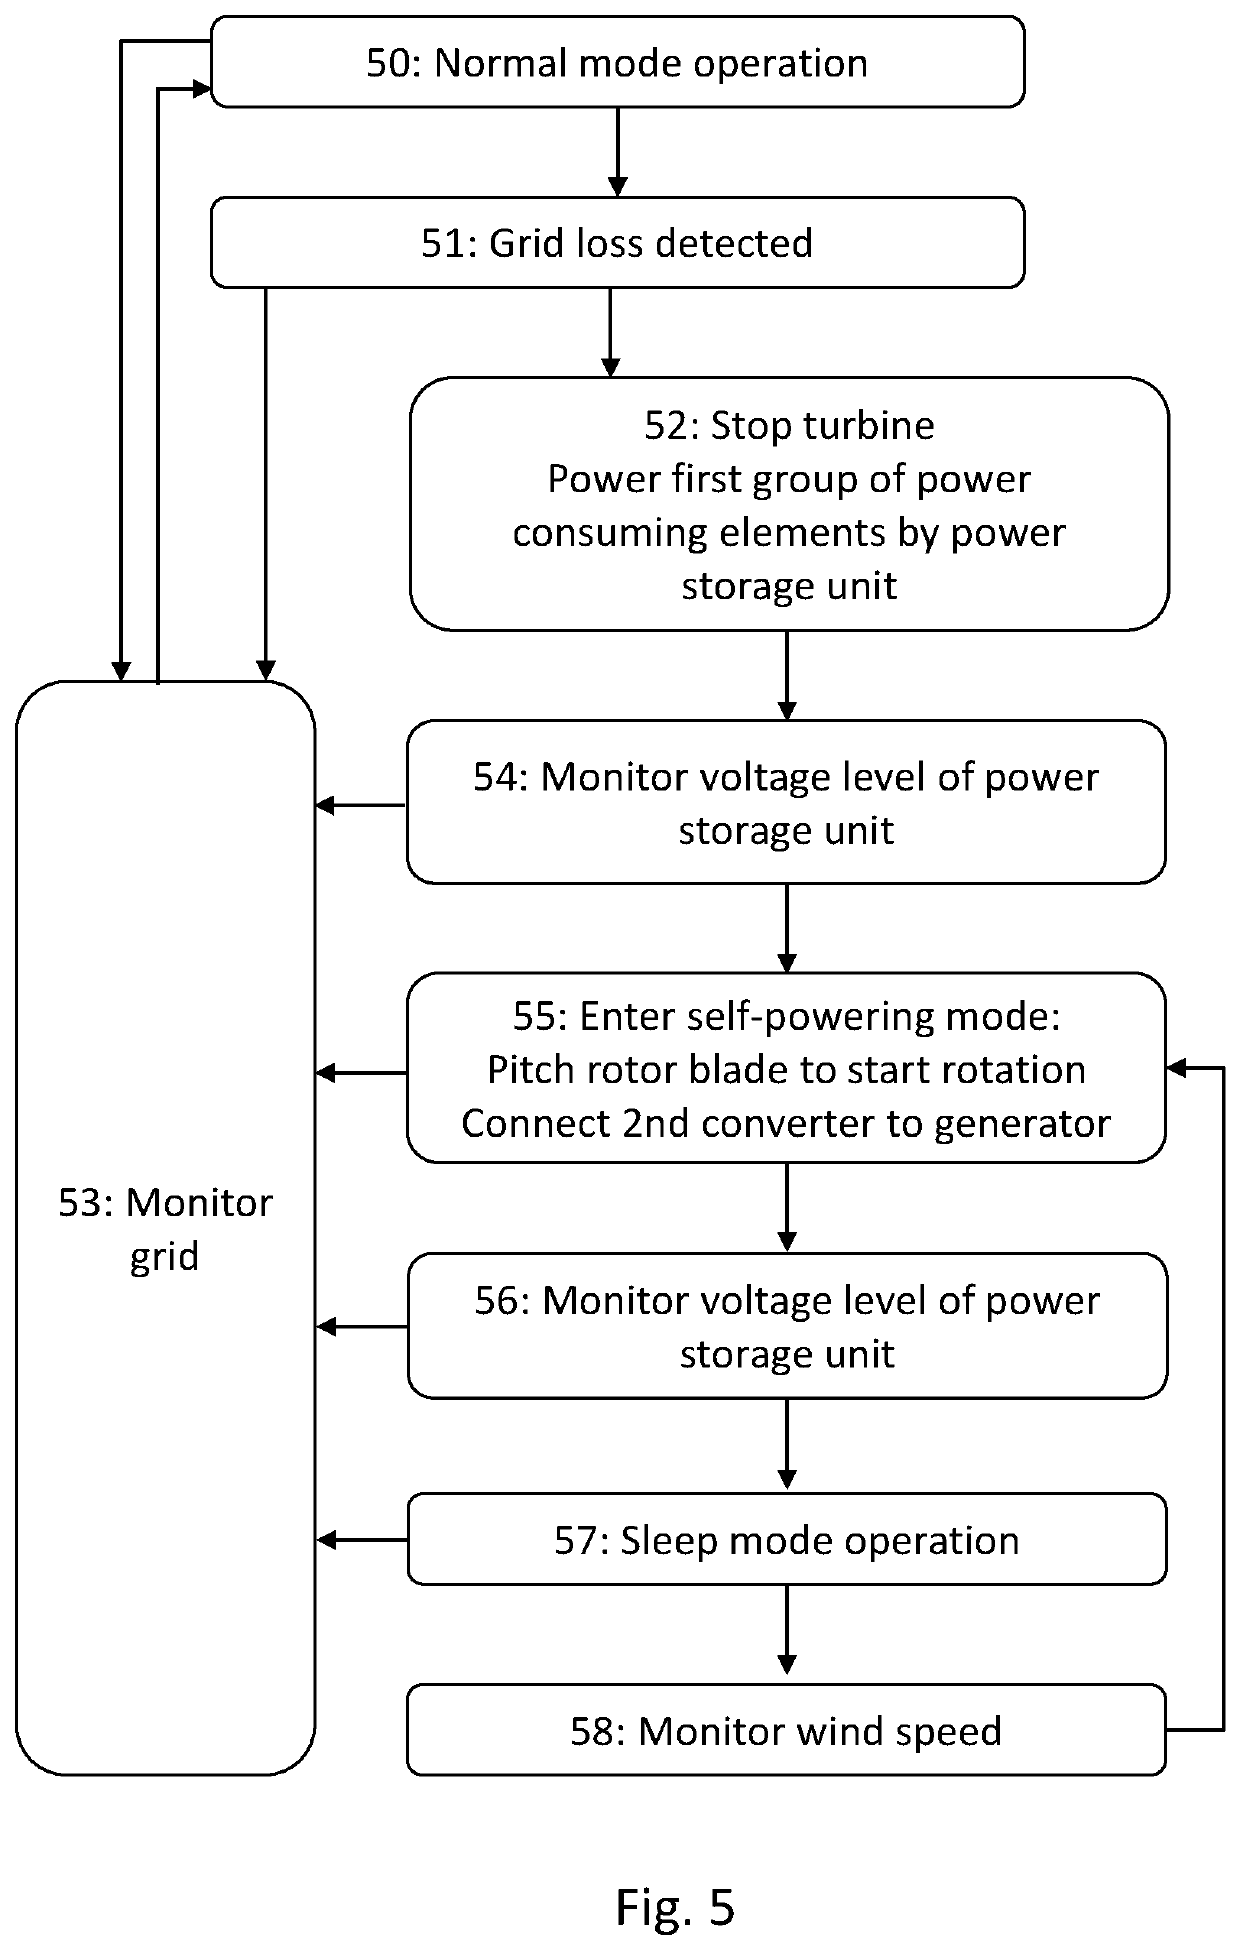 Operation of a wind turbine during grid loss using a power storage unit